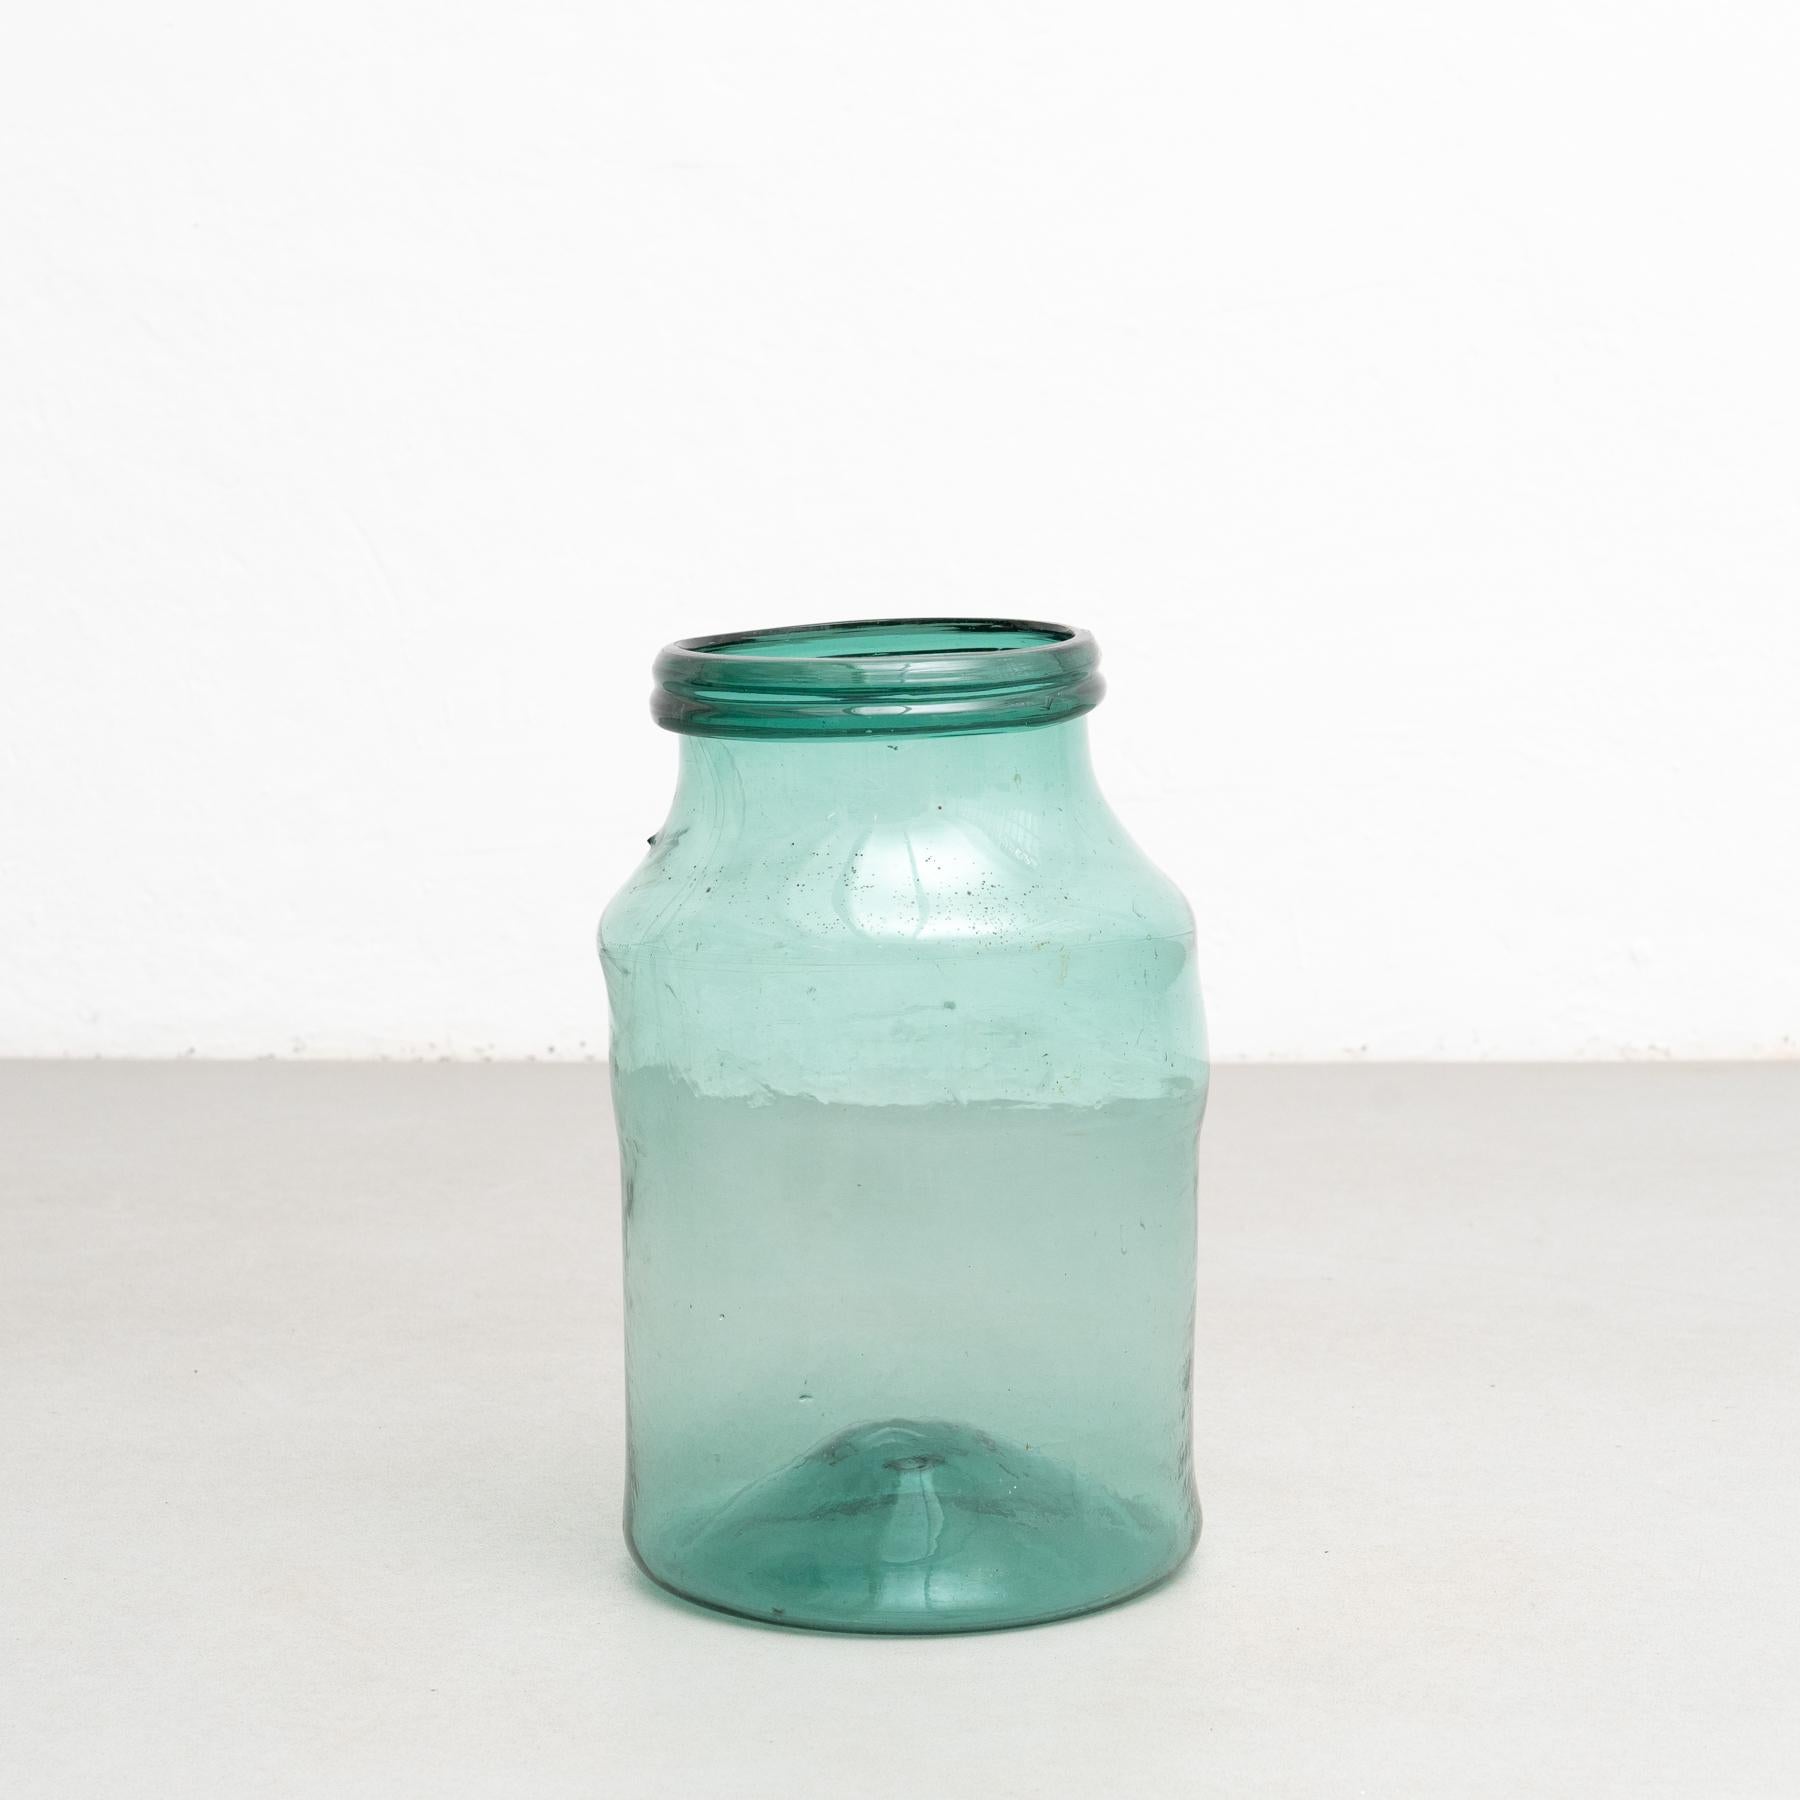 Antique Demijohn glass bottle from Barcelona.

Made by unknown manufacturer in Spain, circa 1950.

In original condition with minor wear consistent of age and use, preserving a beautiful patina.

Materials:
Glass.